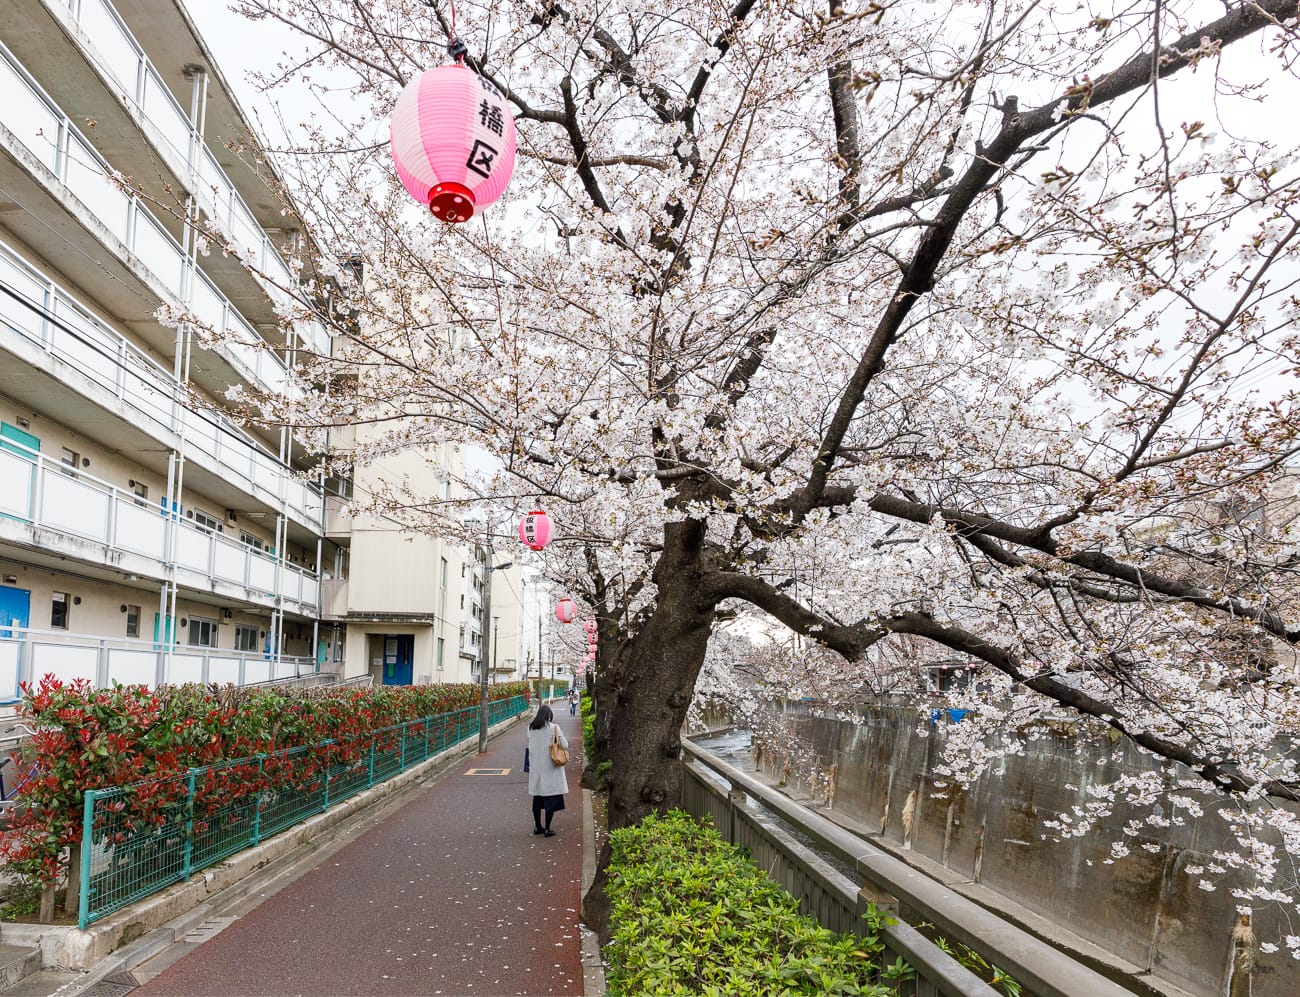 one of the lesser known hanami walking routes in Tokyo is the Shakujii River stretch from Oji Station